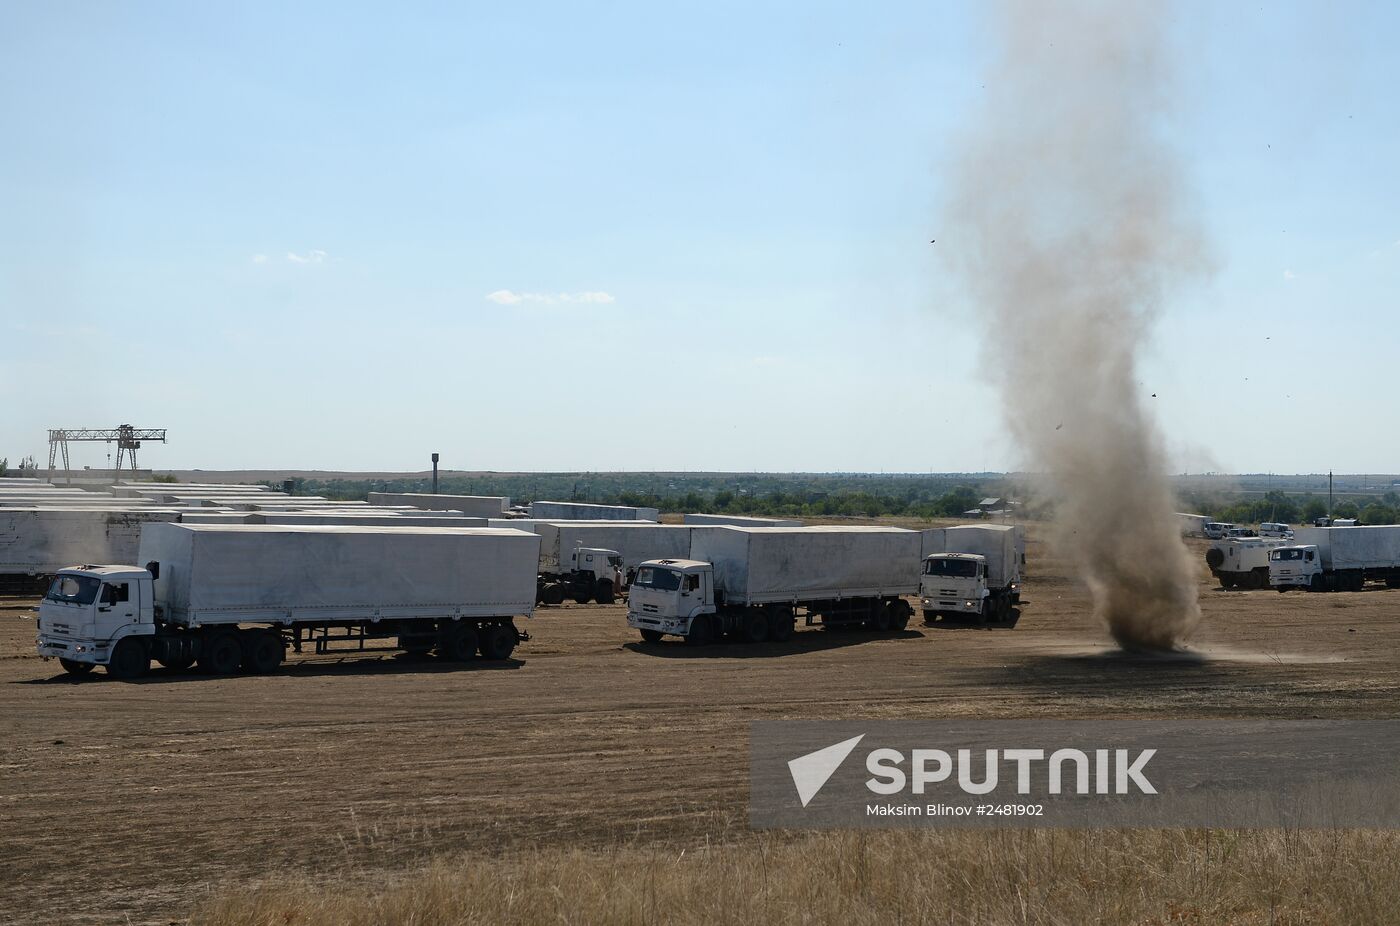 Convoy trucks on the way back to Russia after delivering humanitarian aid to Lugansk